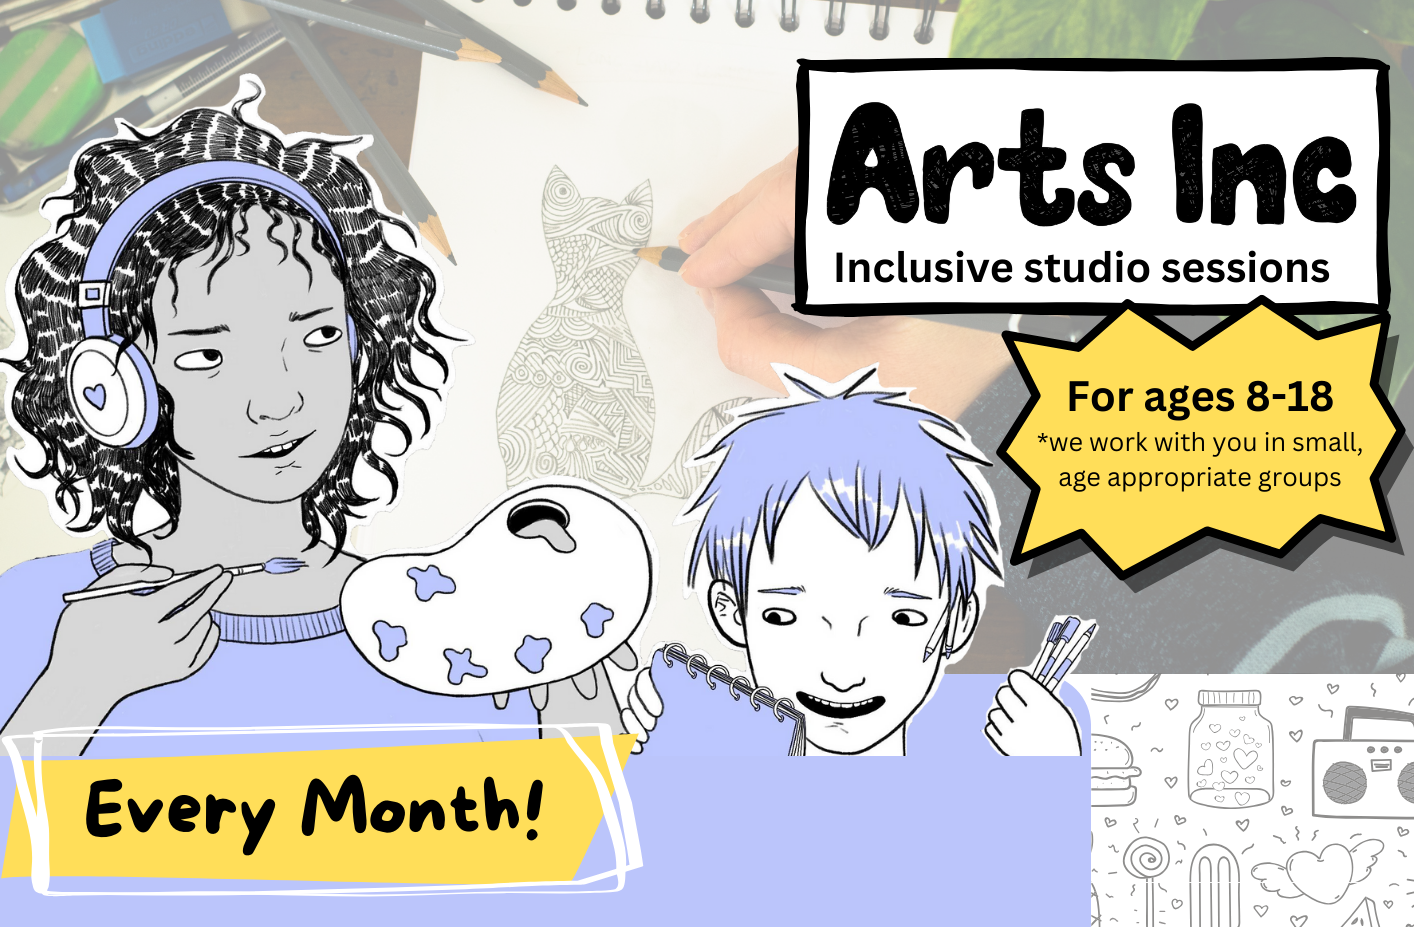 This banner features an illustration of two young artists. On the left an artist with curly dark hair and ear defenders holds a paint palette and brushes. Another young artist beside them holds a sketchbook and pencils. A faded out photograph behind them is of a person drawing a cat.